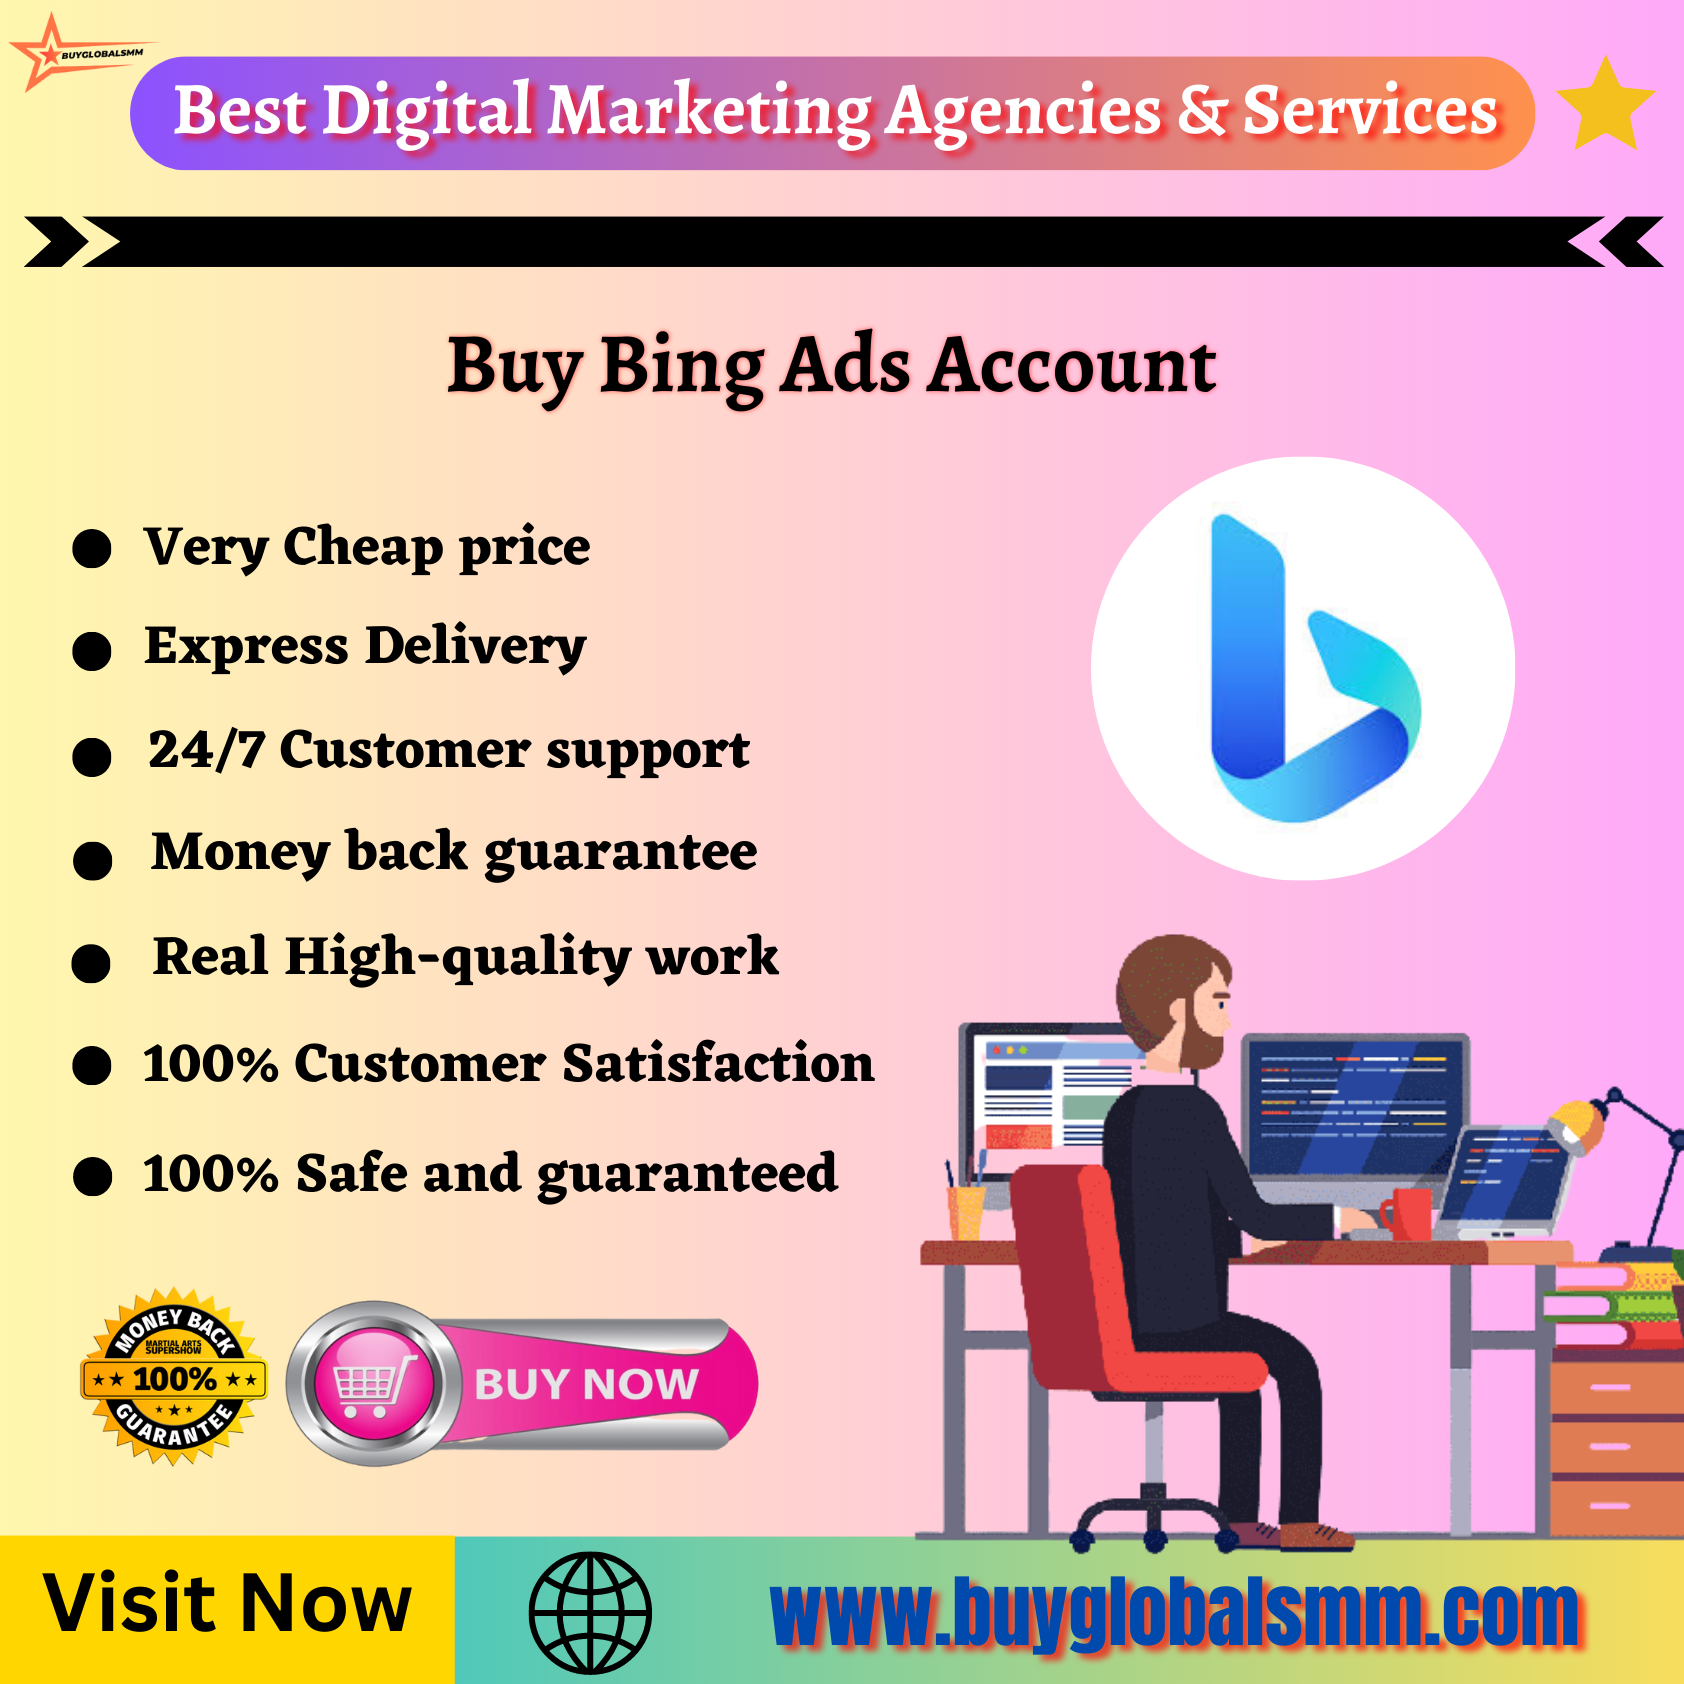 Buy Bing Ads Account-100% trusted service, and cheap...